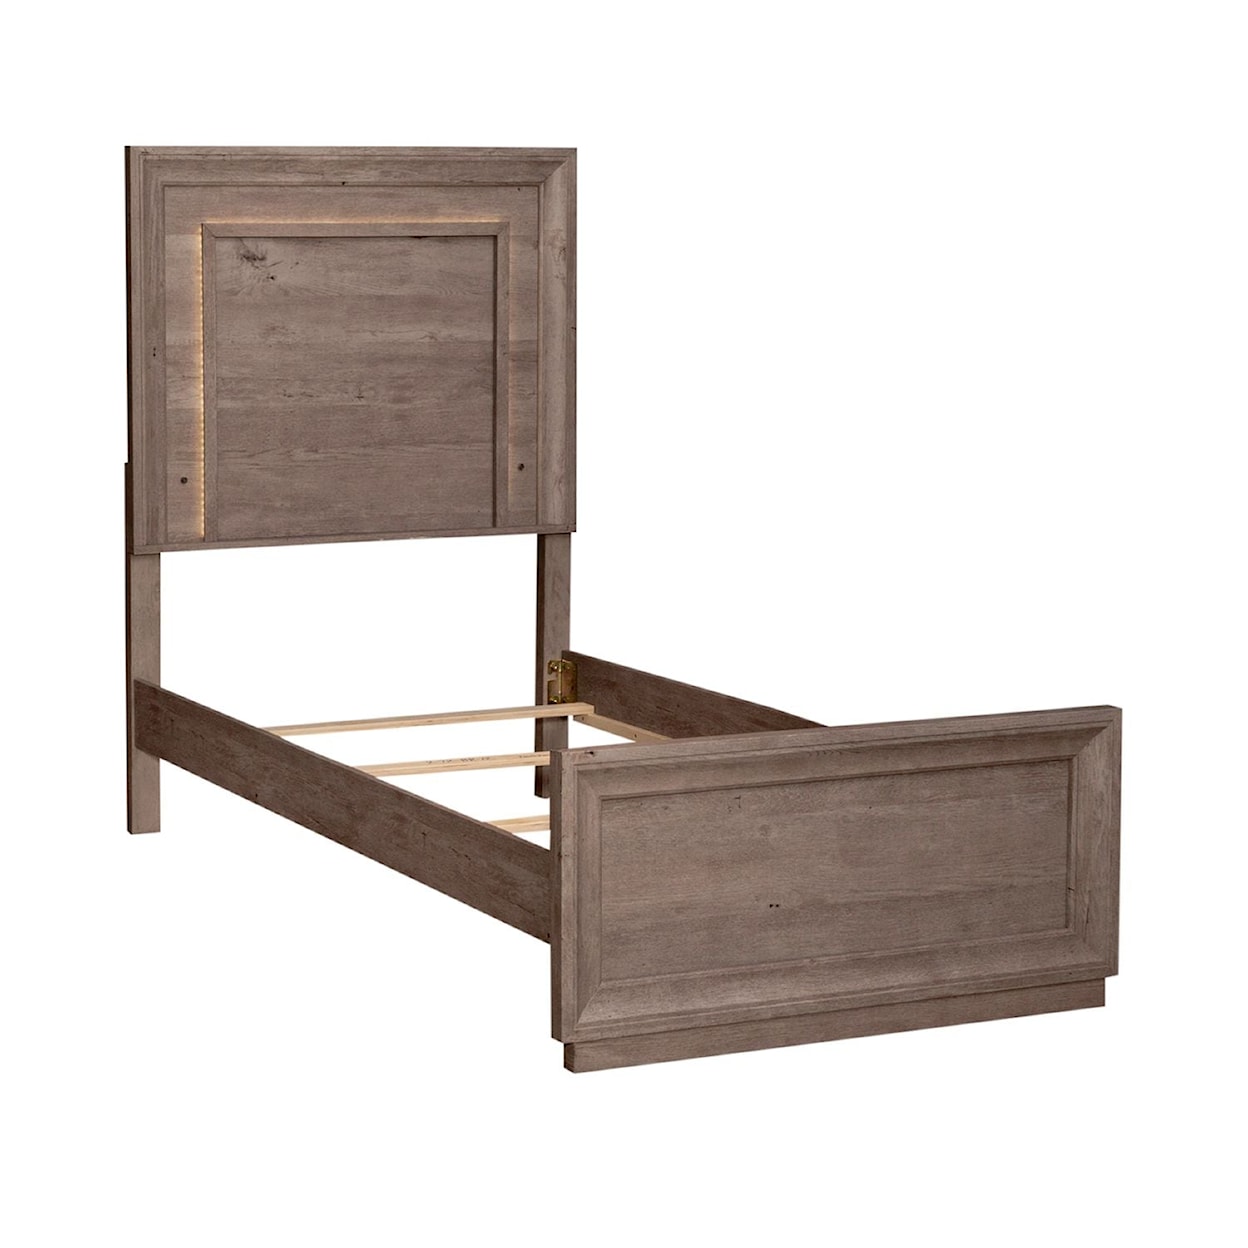 Libby Horizons Twin Panel Bed